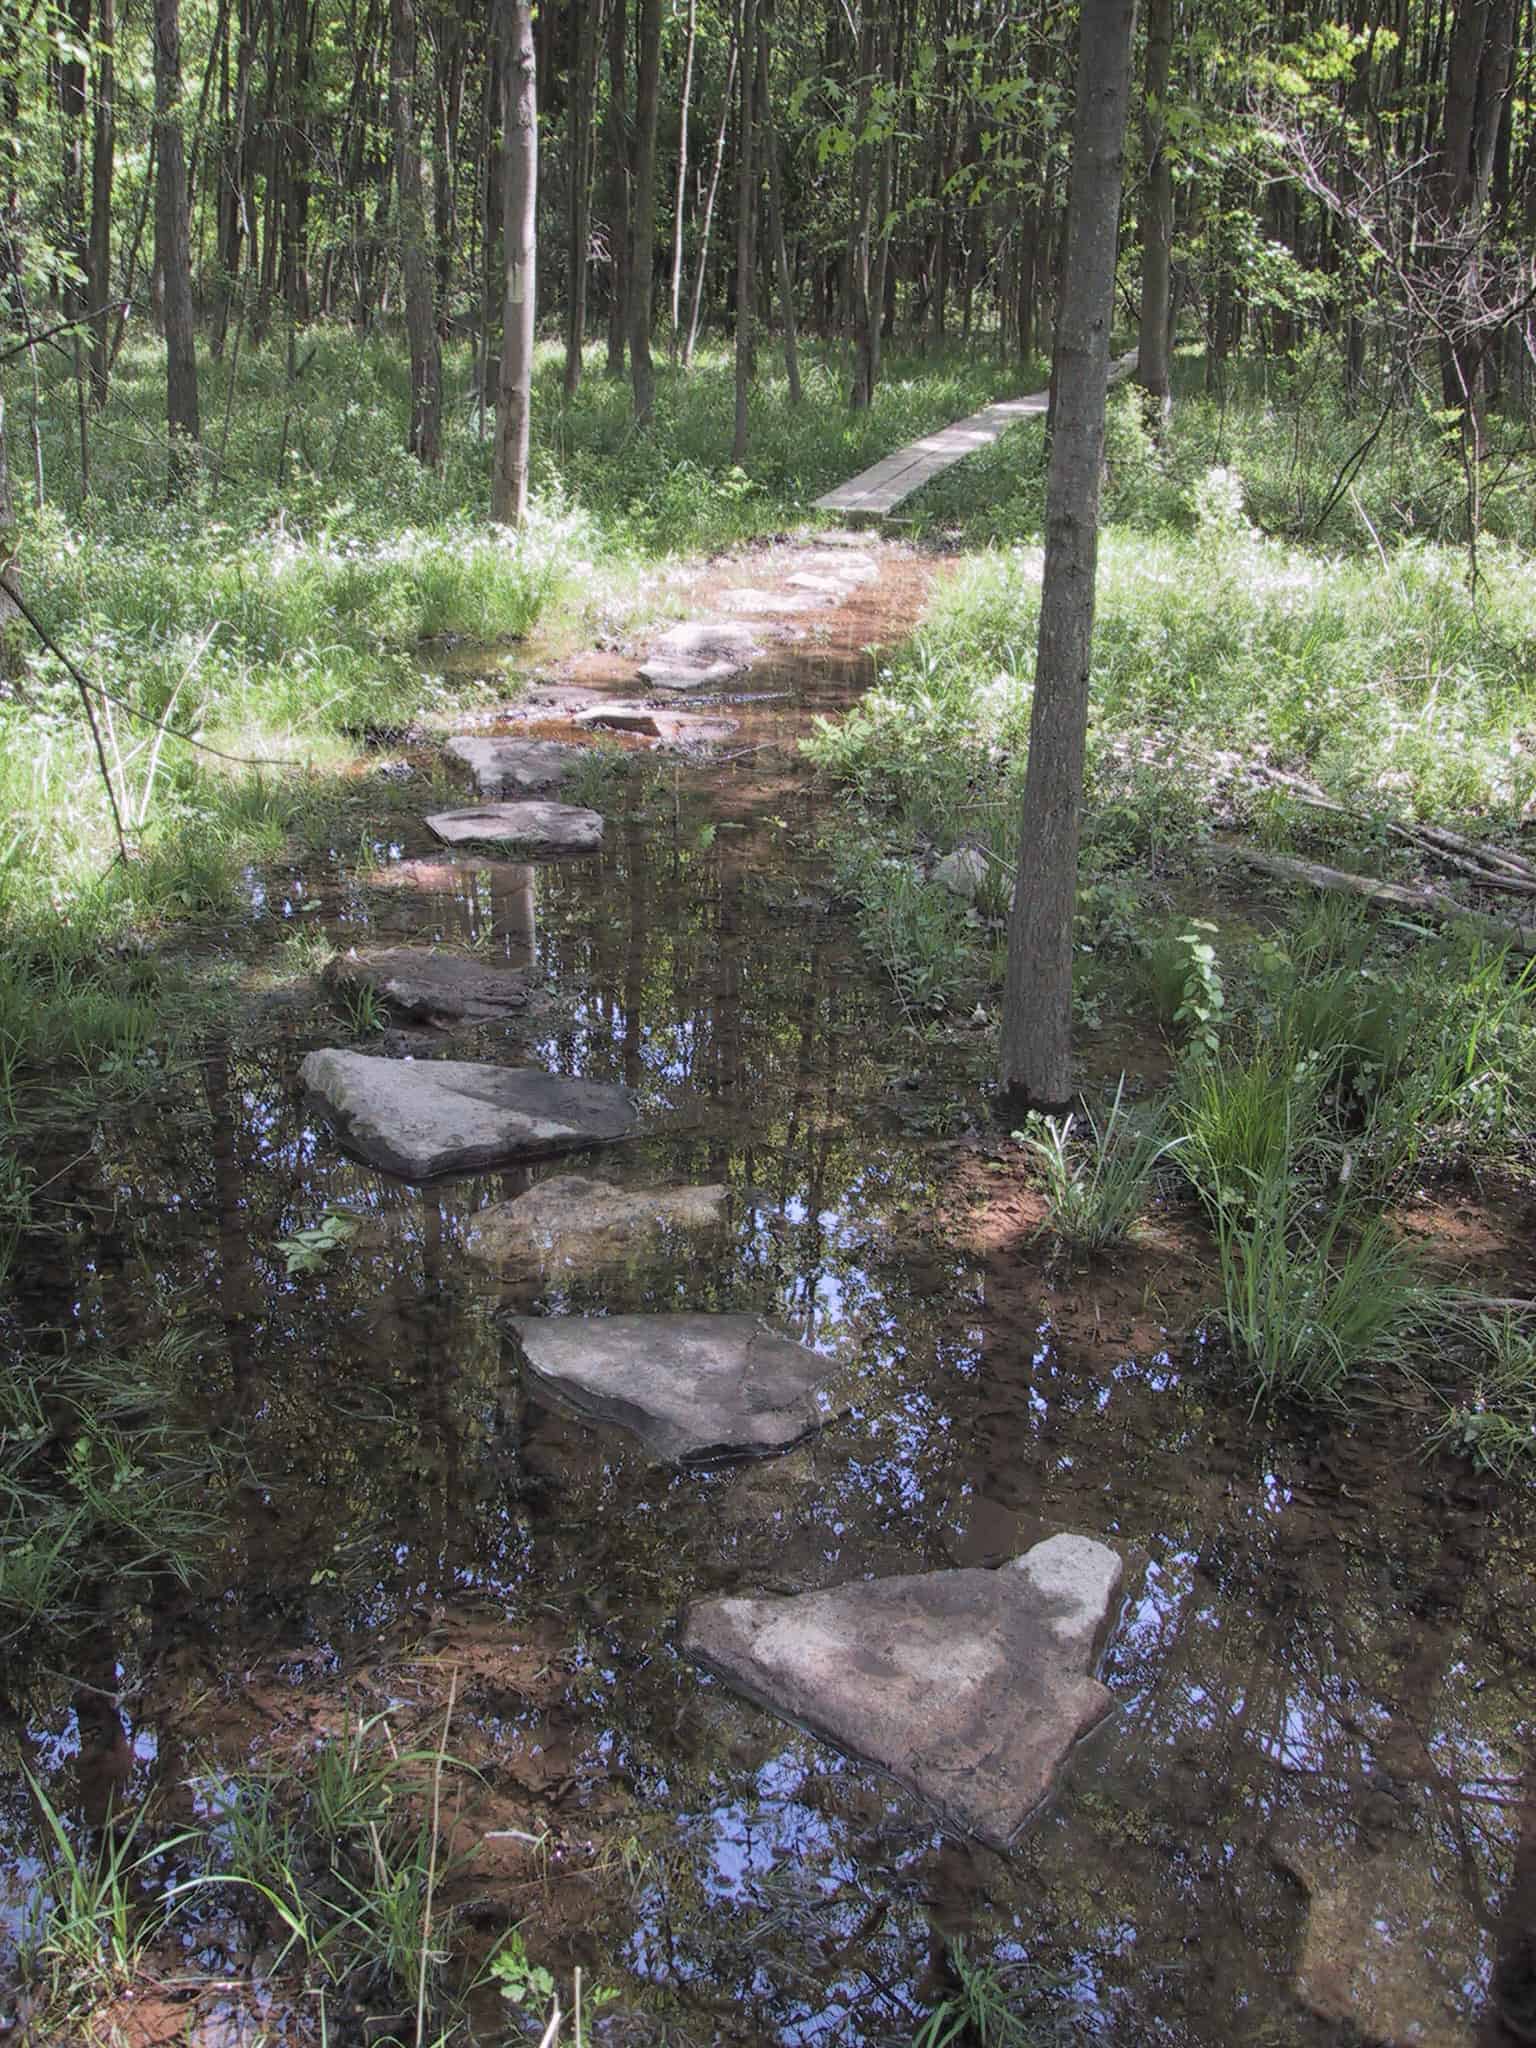 Stepping stones surrounded by water on a trail in the woods